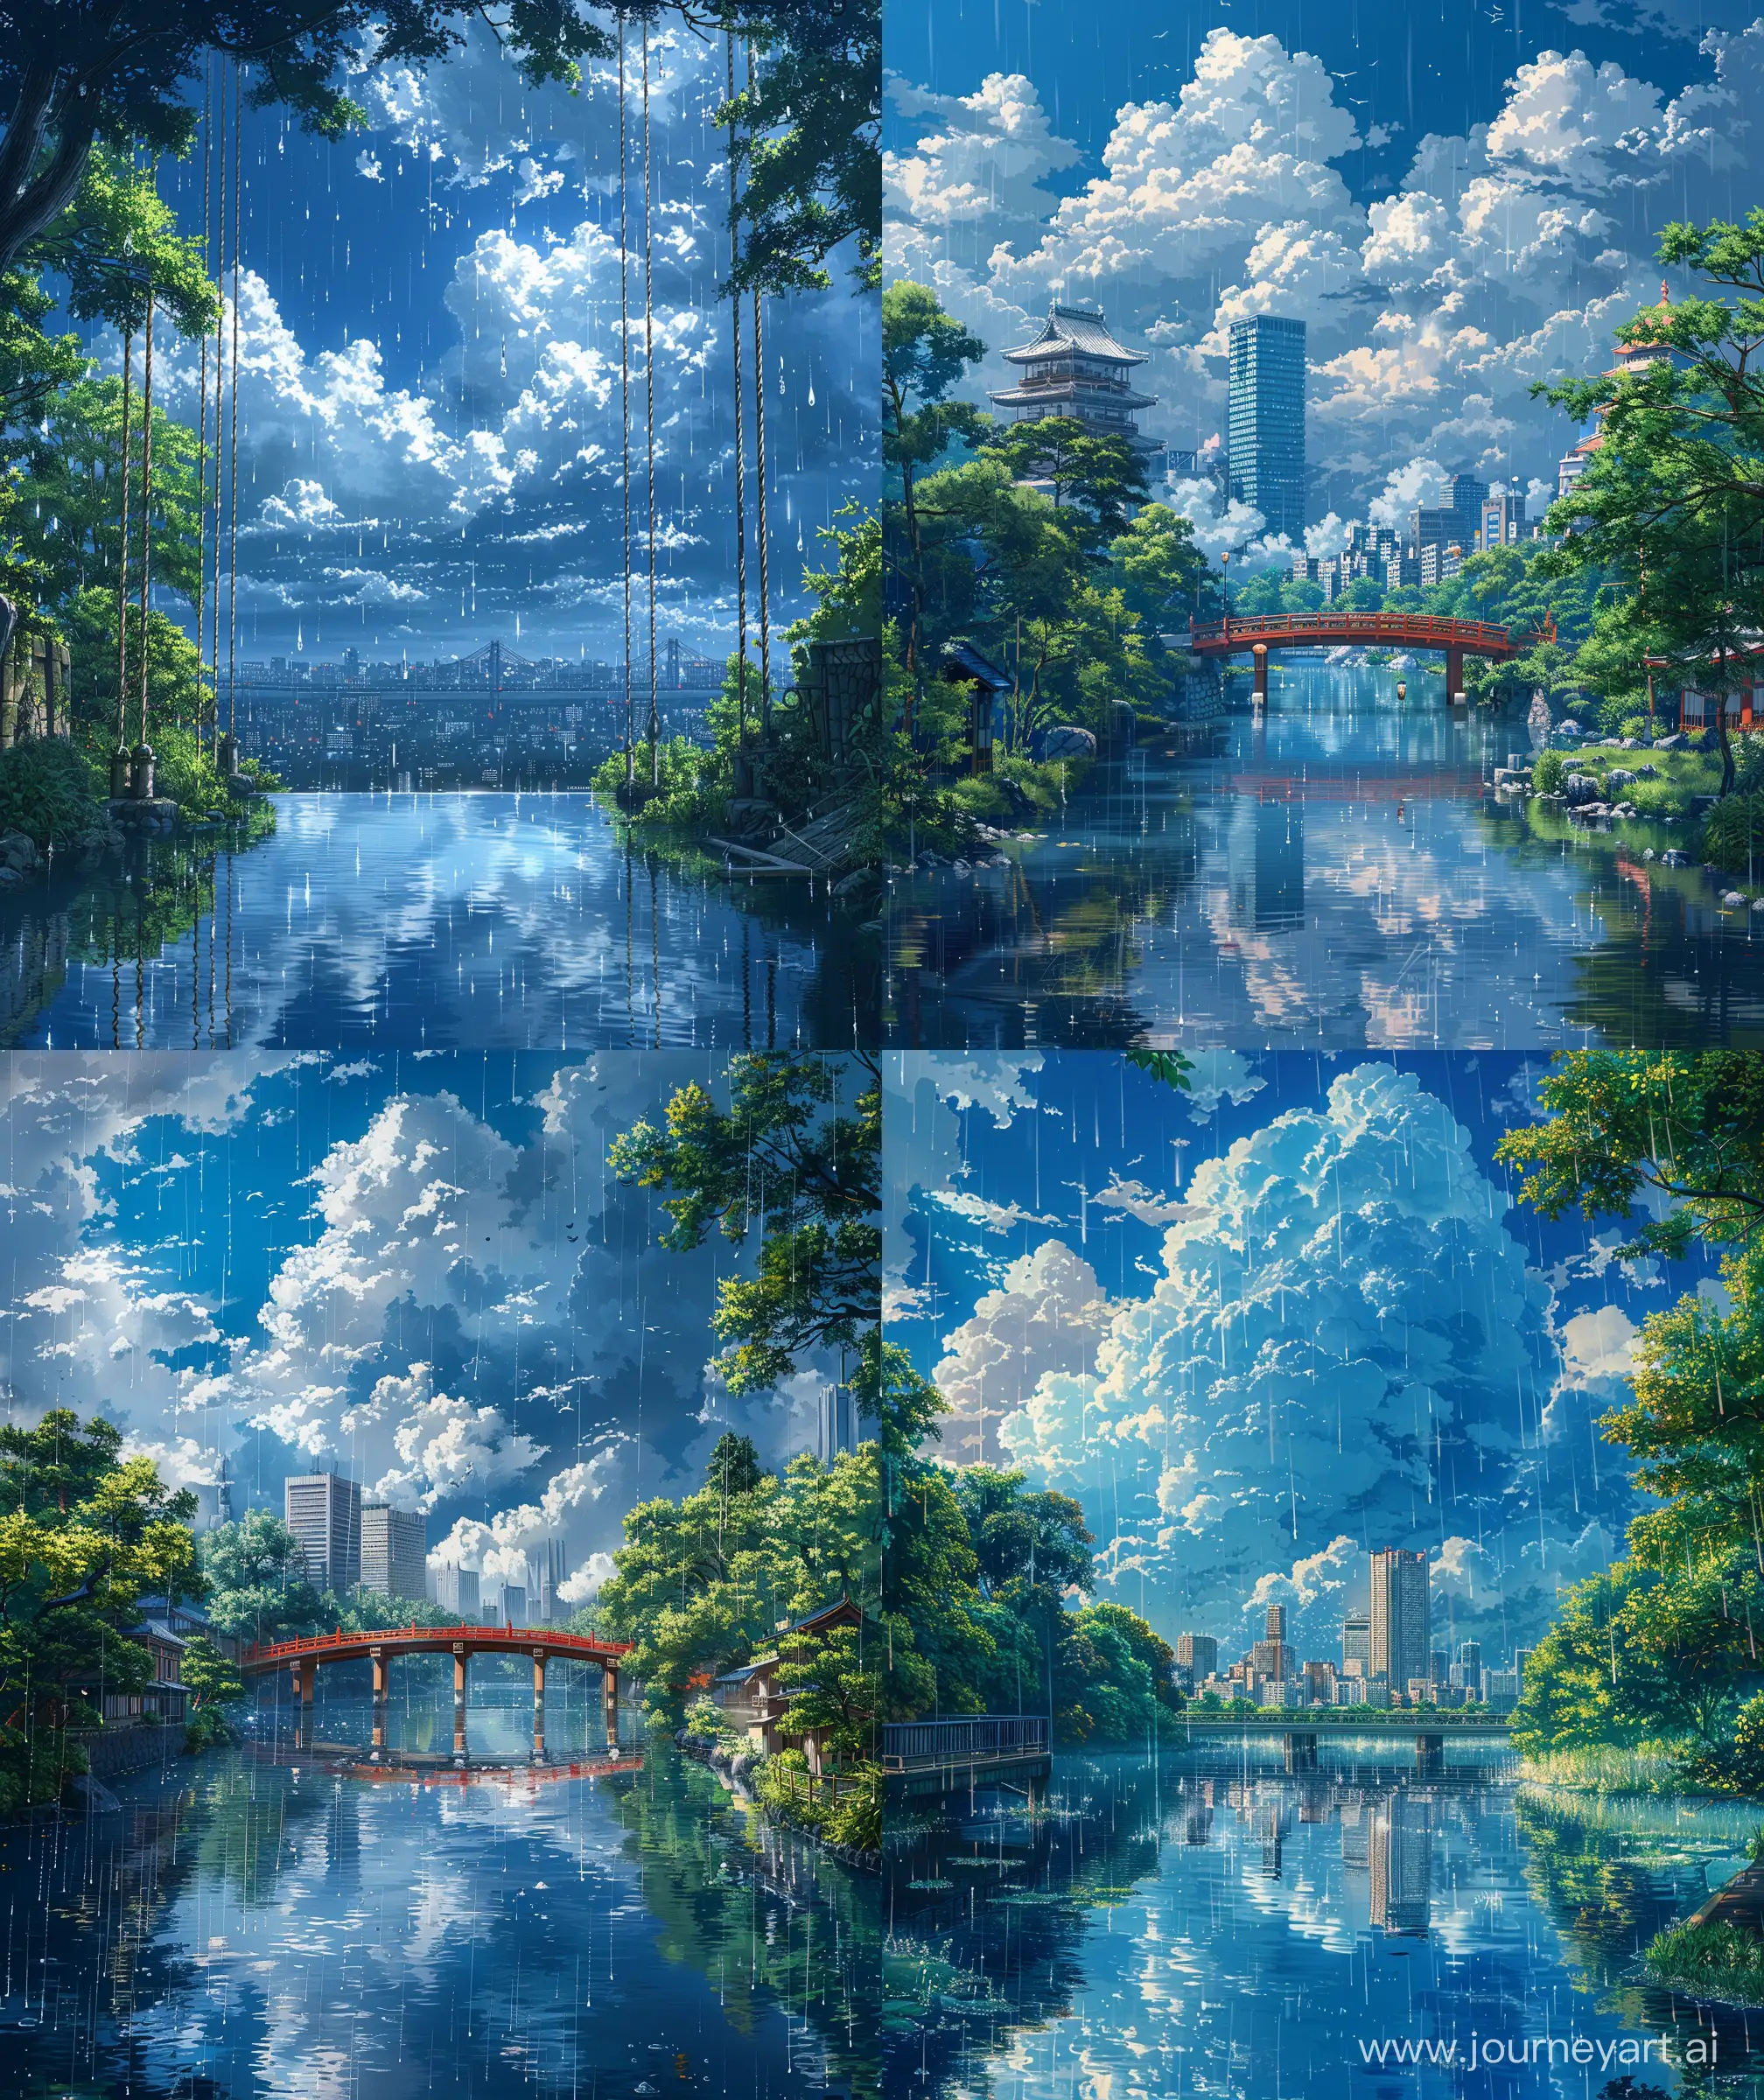 Serene-Anime-Cityscape-with-Reflections-under-a-Blue-Sky-and-Rainy-Atmosphere